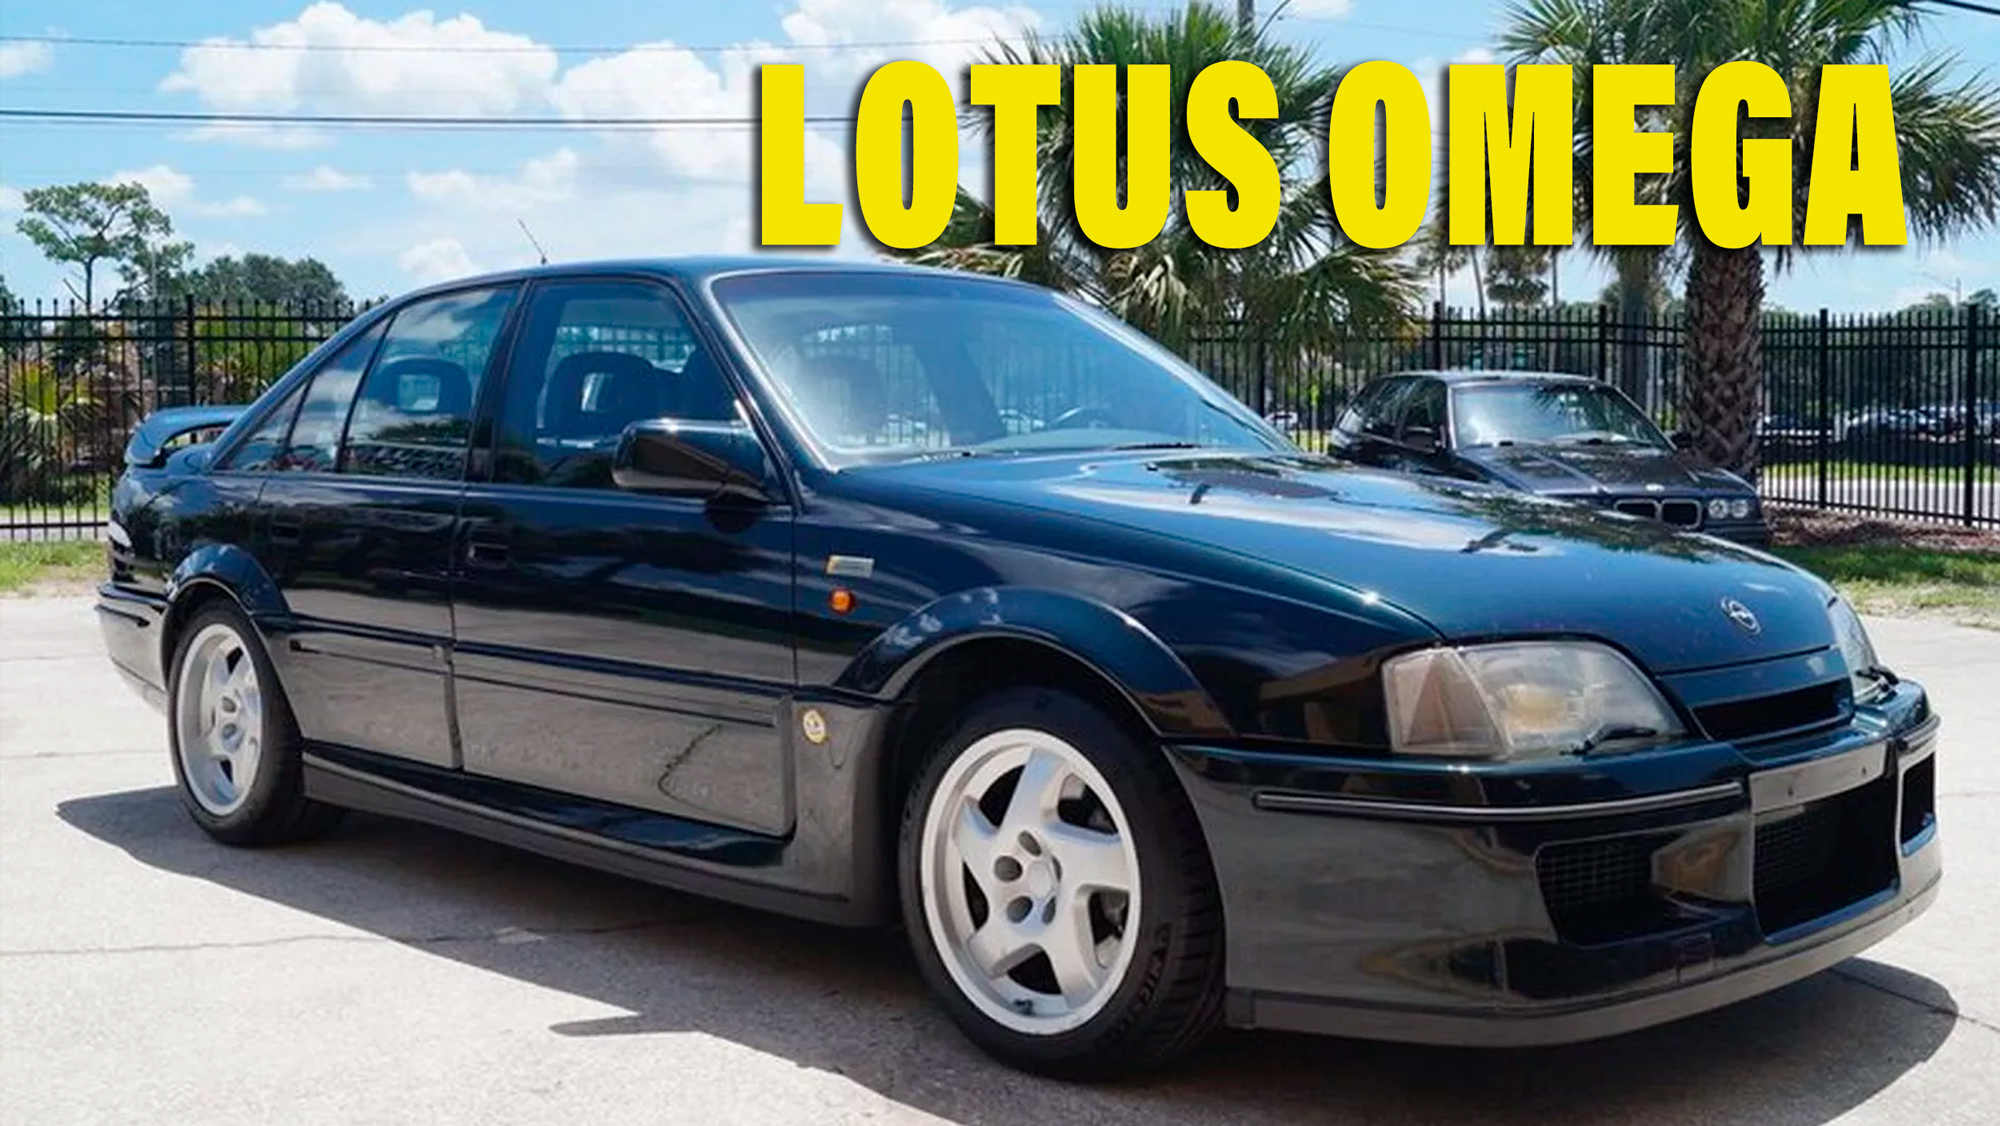 The 950 Omega Sedans Made, Two Are For Sale Florida Dealer | Carscoops